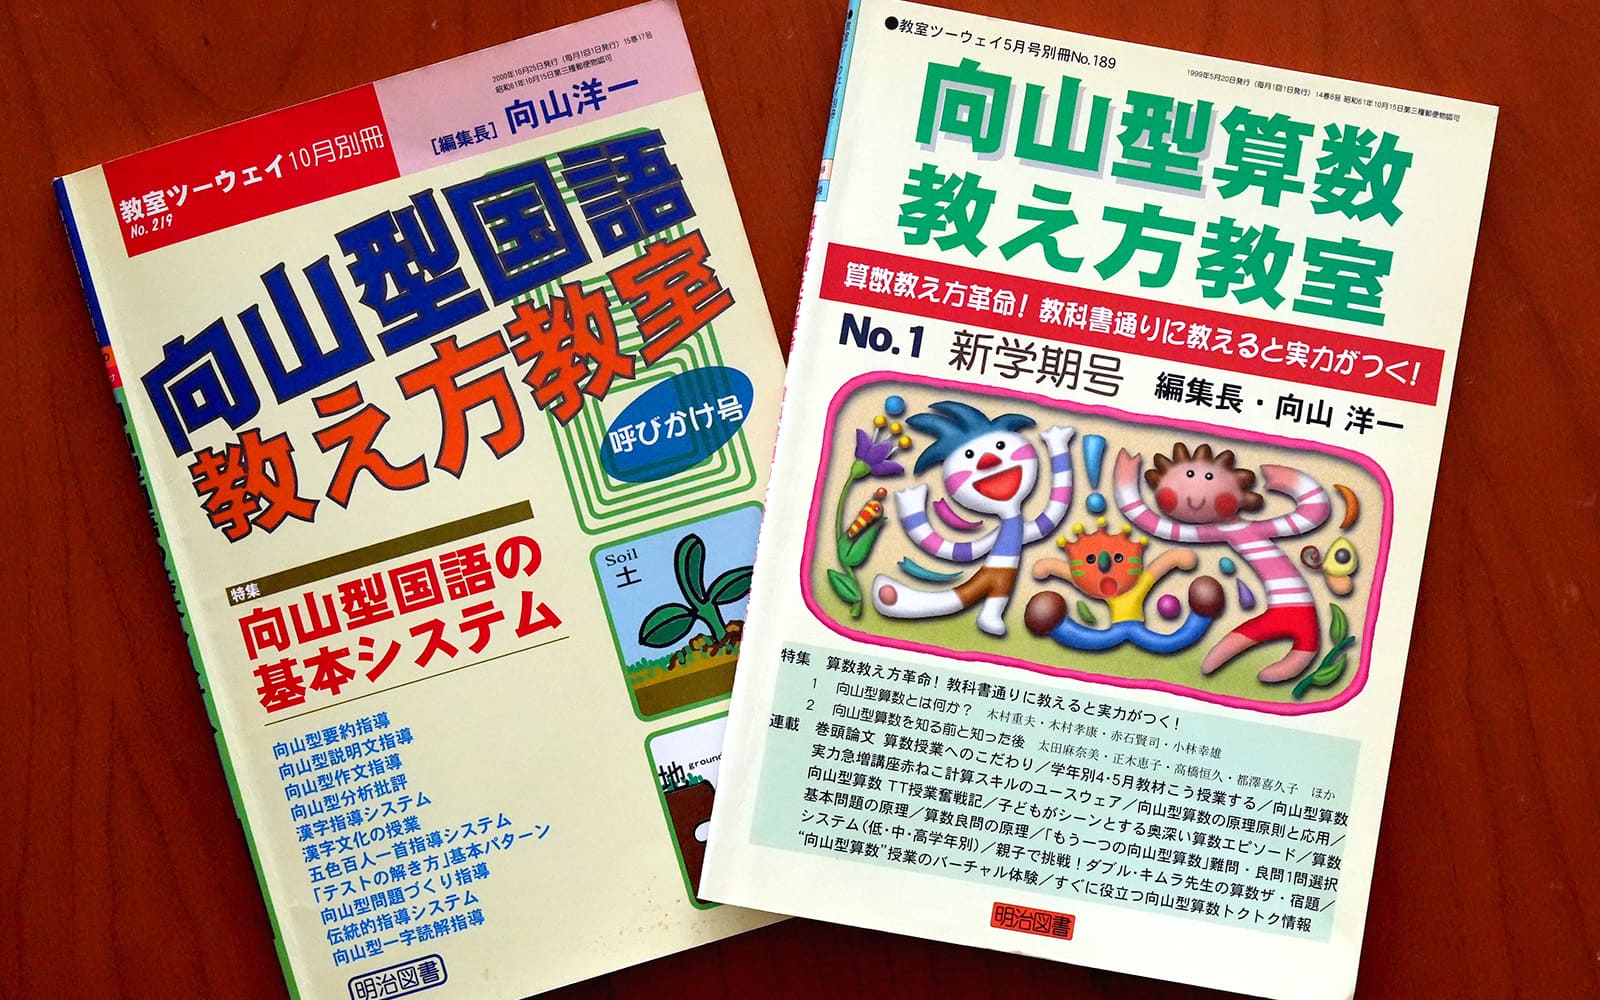 Mr. Mukoyama continually developed new educational methods and systems that “enable children who struggle with studying
to succeed.” (Education magazines edited by Mr. Mukoyama, circa 2000)